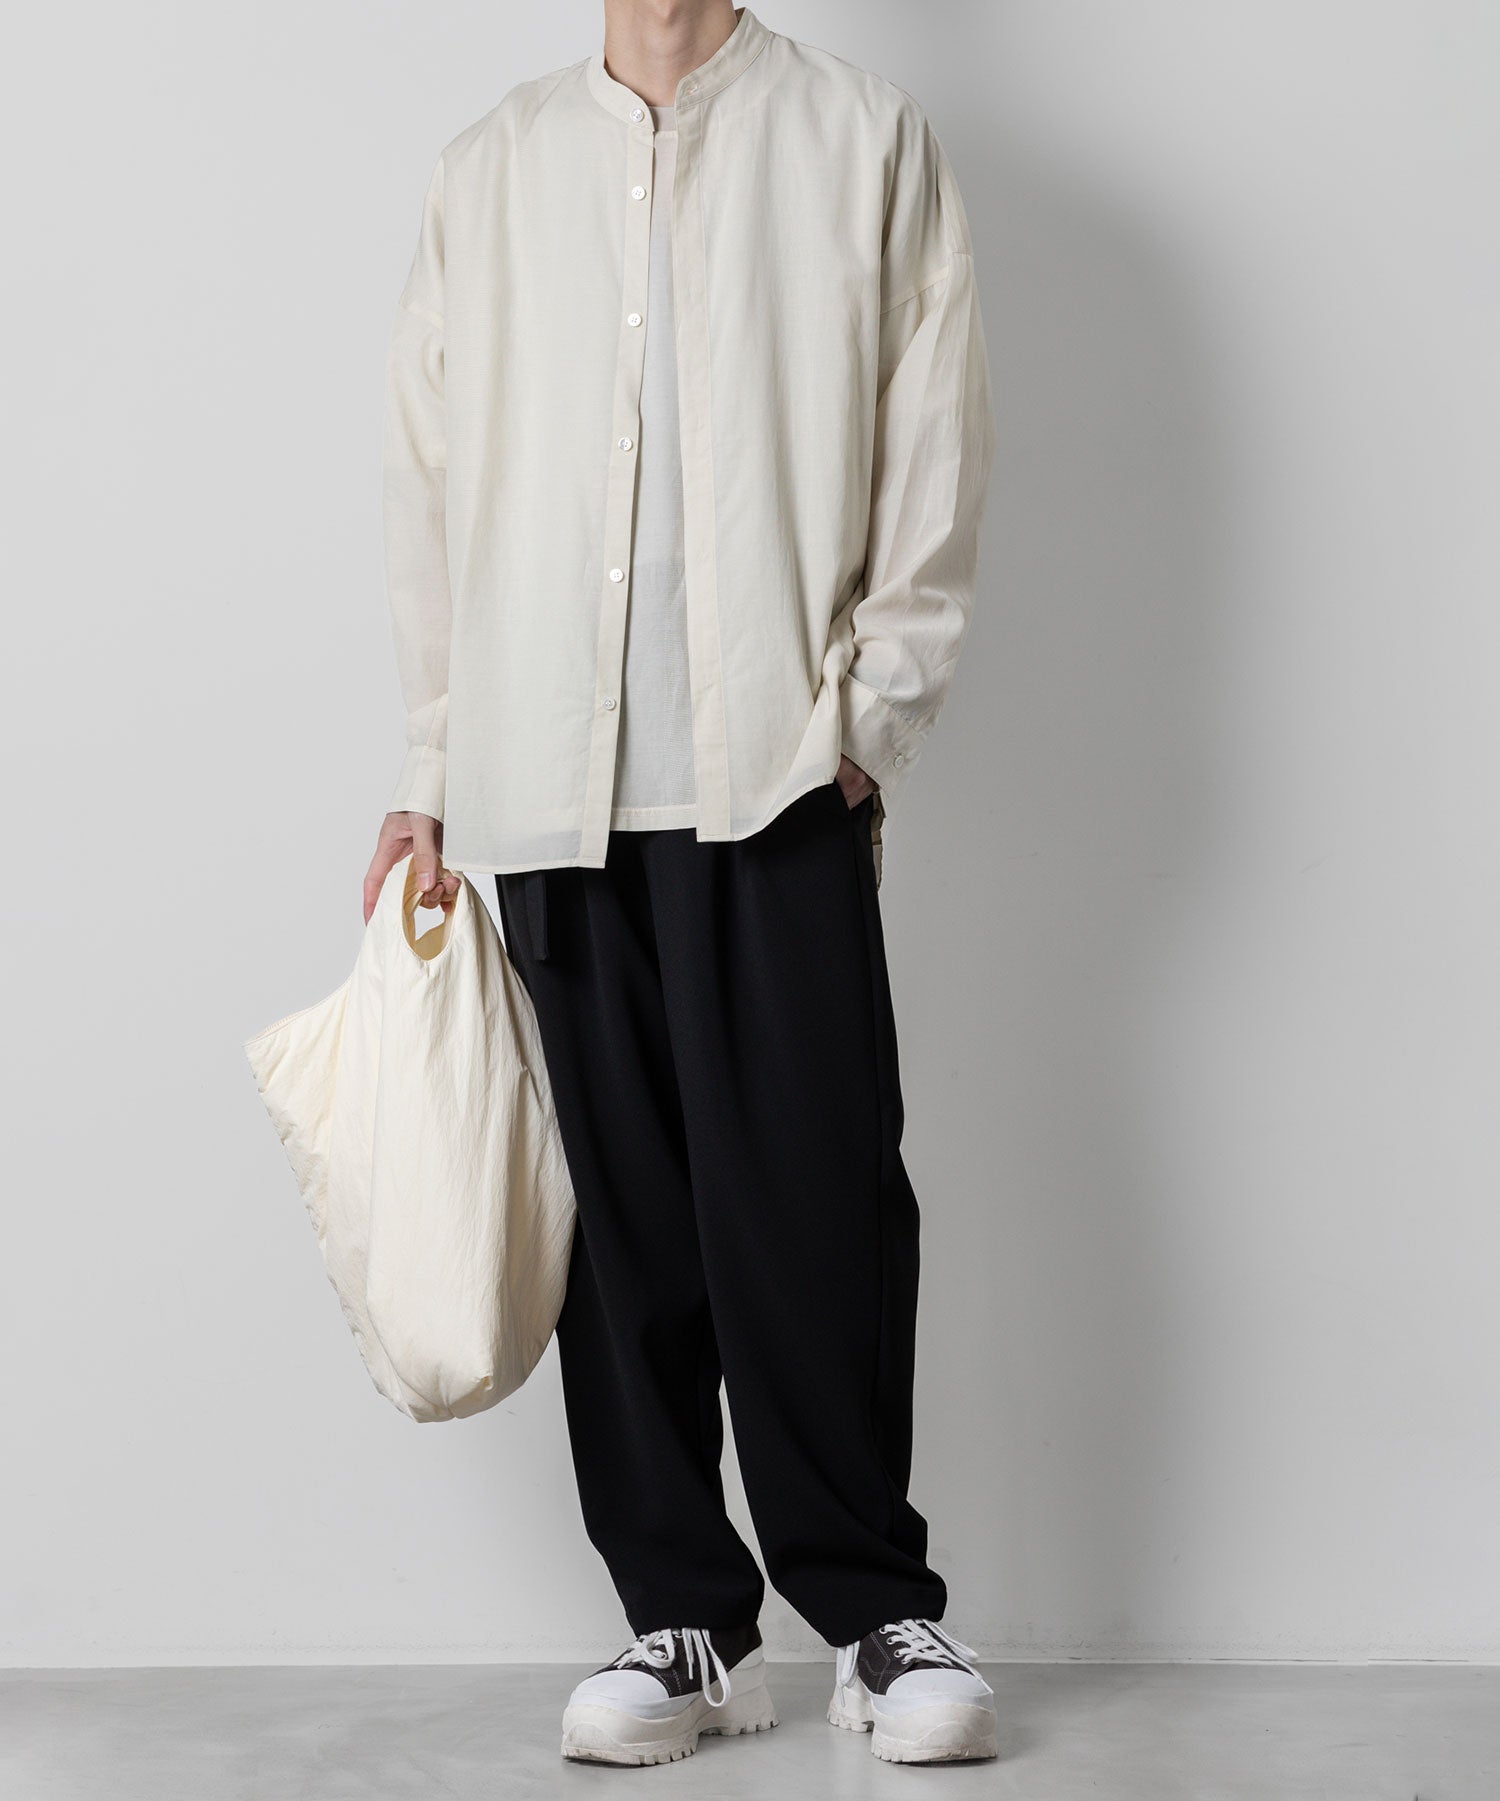 【ATTACHMENT】ATTACHMENT アタッチメントのRY/CO JACQUARD OVERSIZED BAND COLLAR L/S - OFF WITE 公式通販サイトsession福岡セレクトショップ